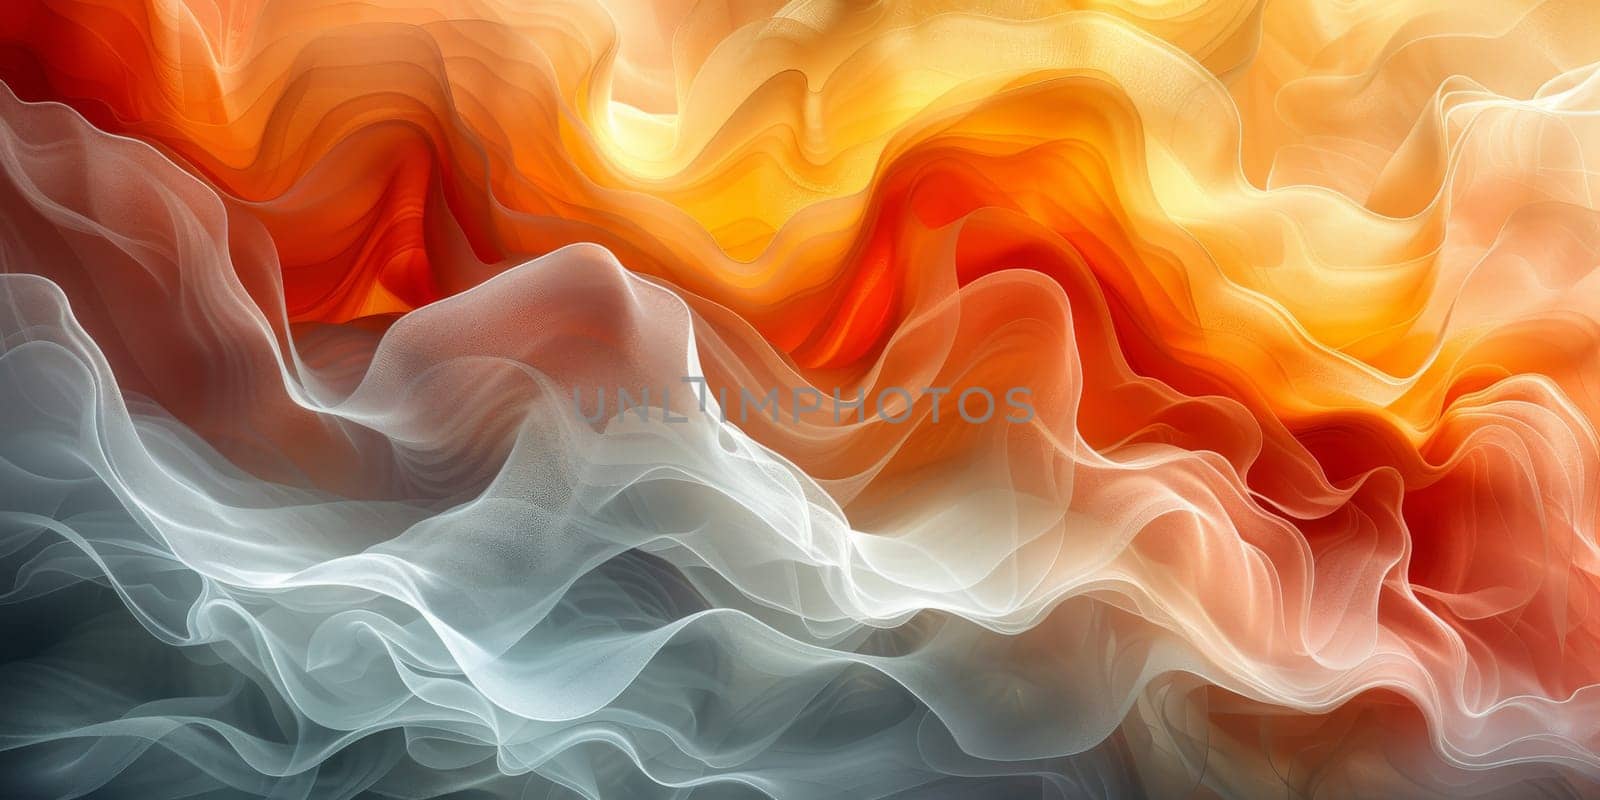 Colorful textured abstract art background. Creativity banner.